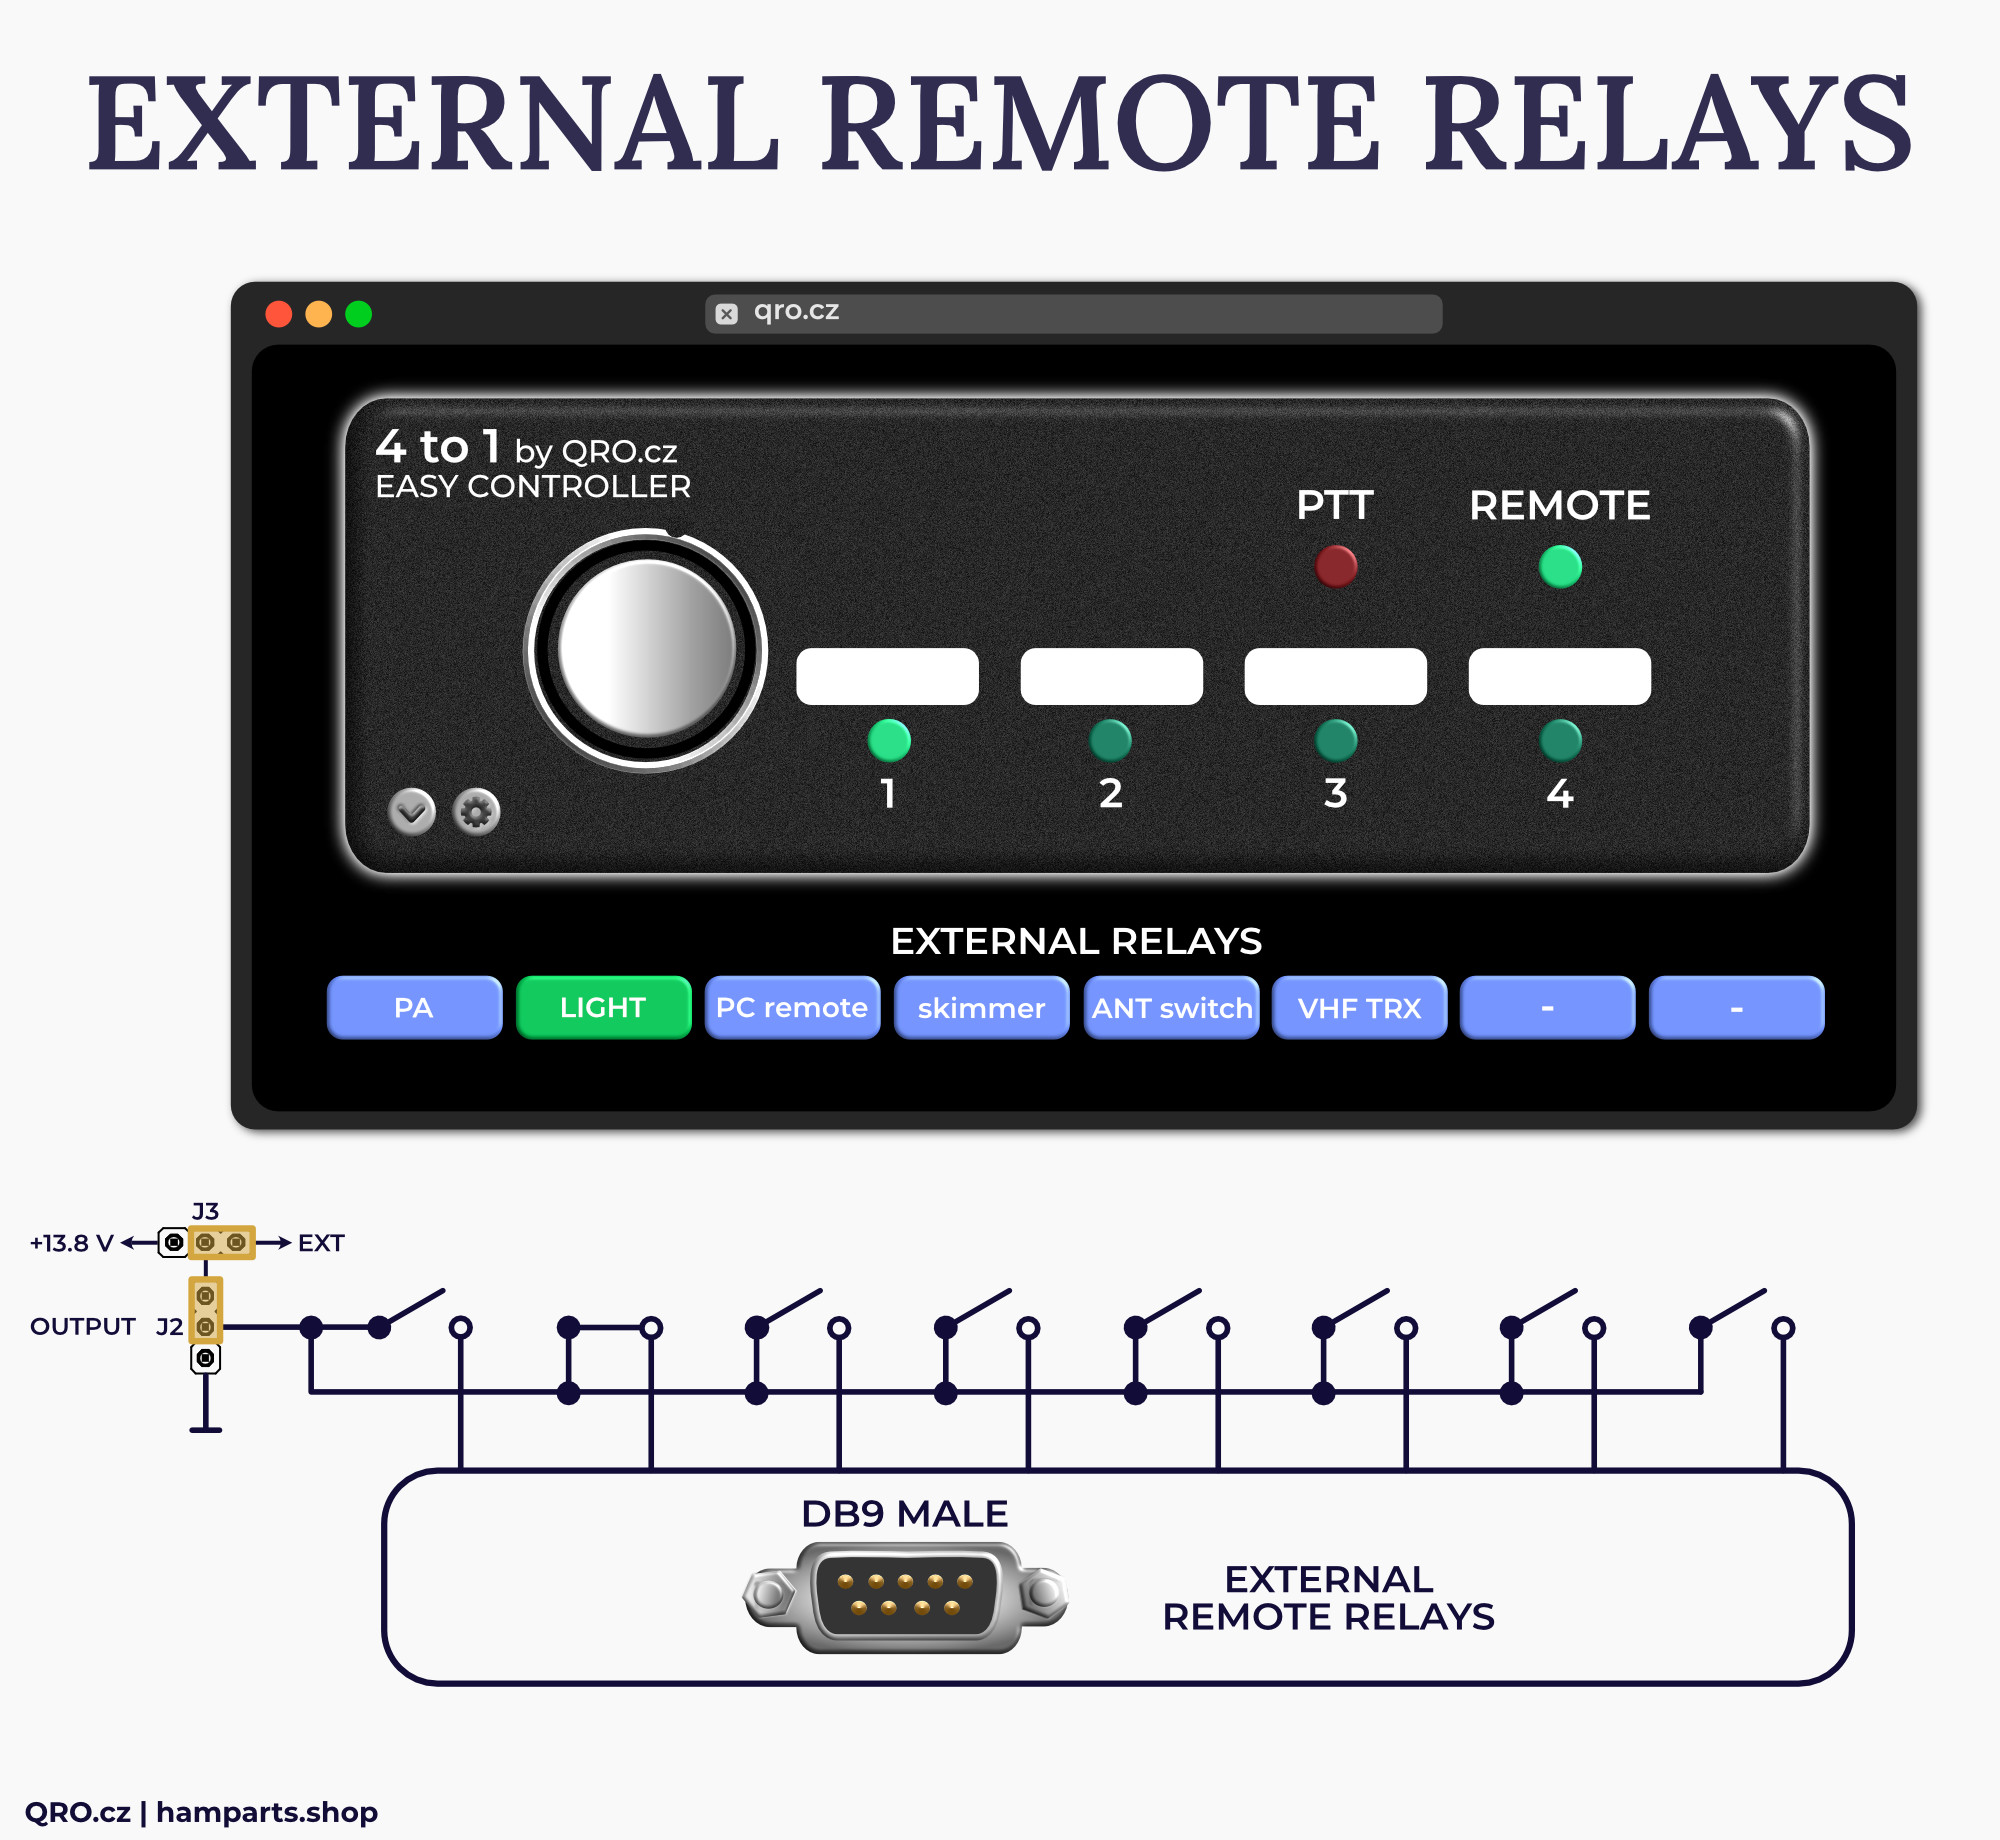 easy controller for 4-1 antenna switch example of external relays by qro.cz hamparts.shop